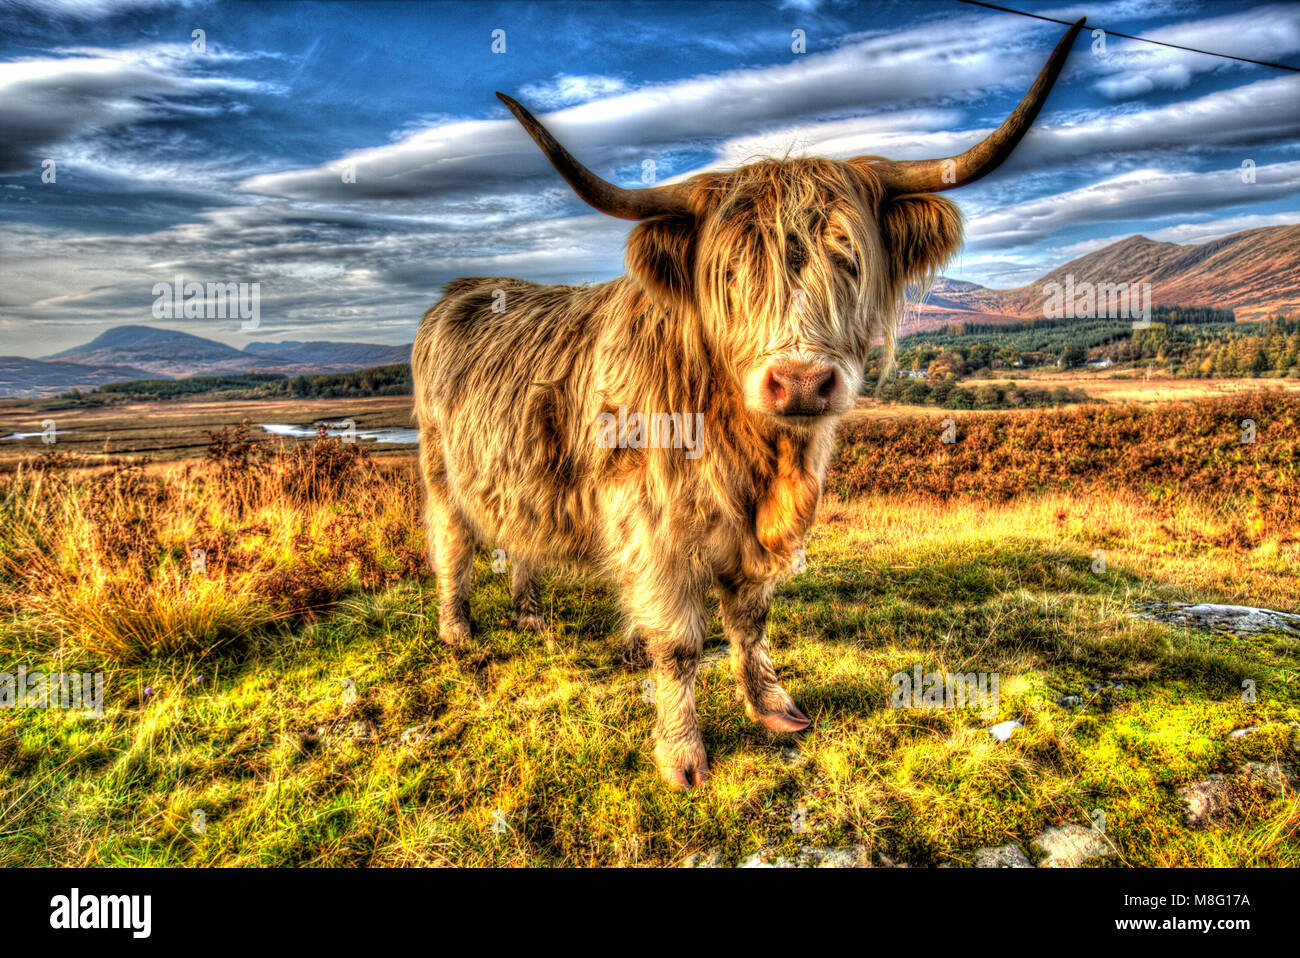 Isle of Mull, Scotland. Artistic close up view of a highland cow grazing in the Ardnadrochit area of the Isle of Mull. Stock Photo